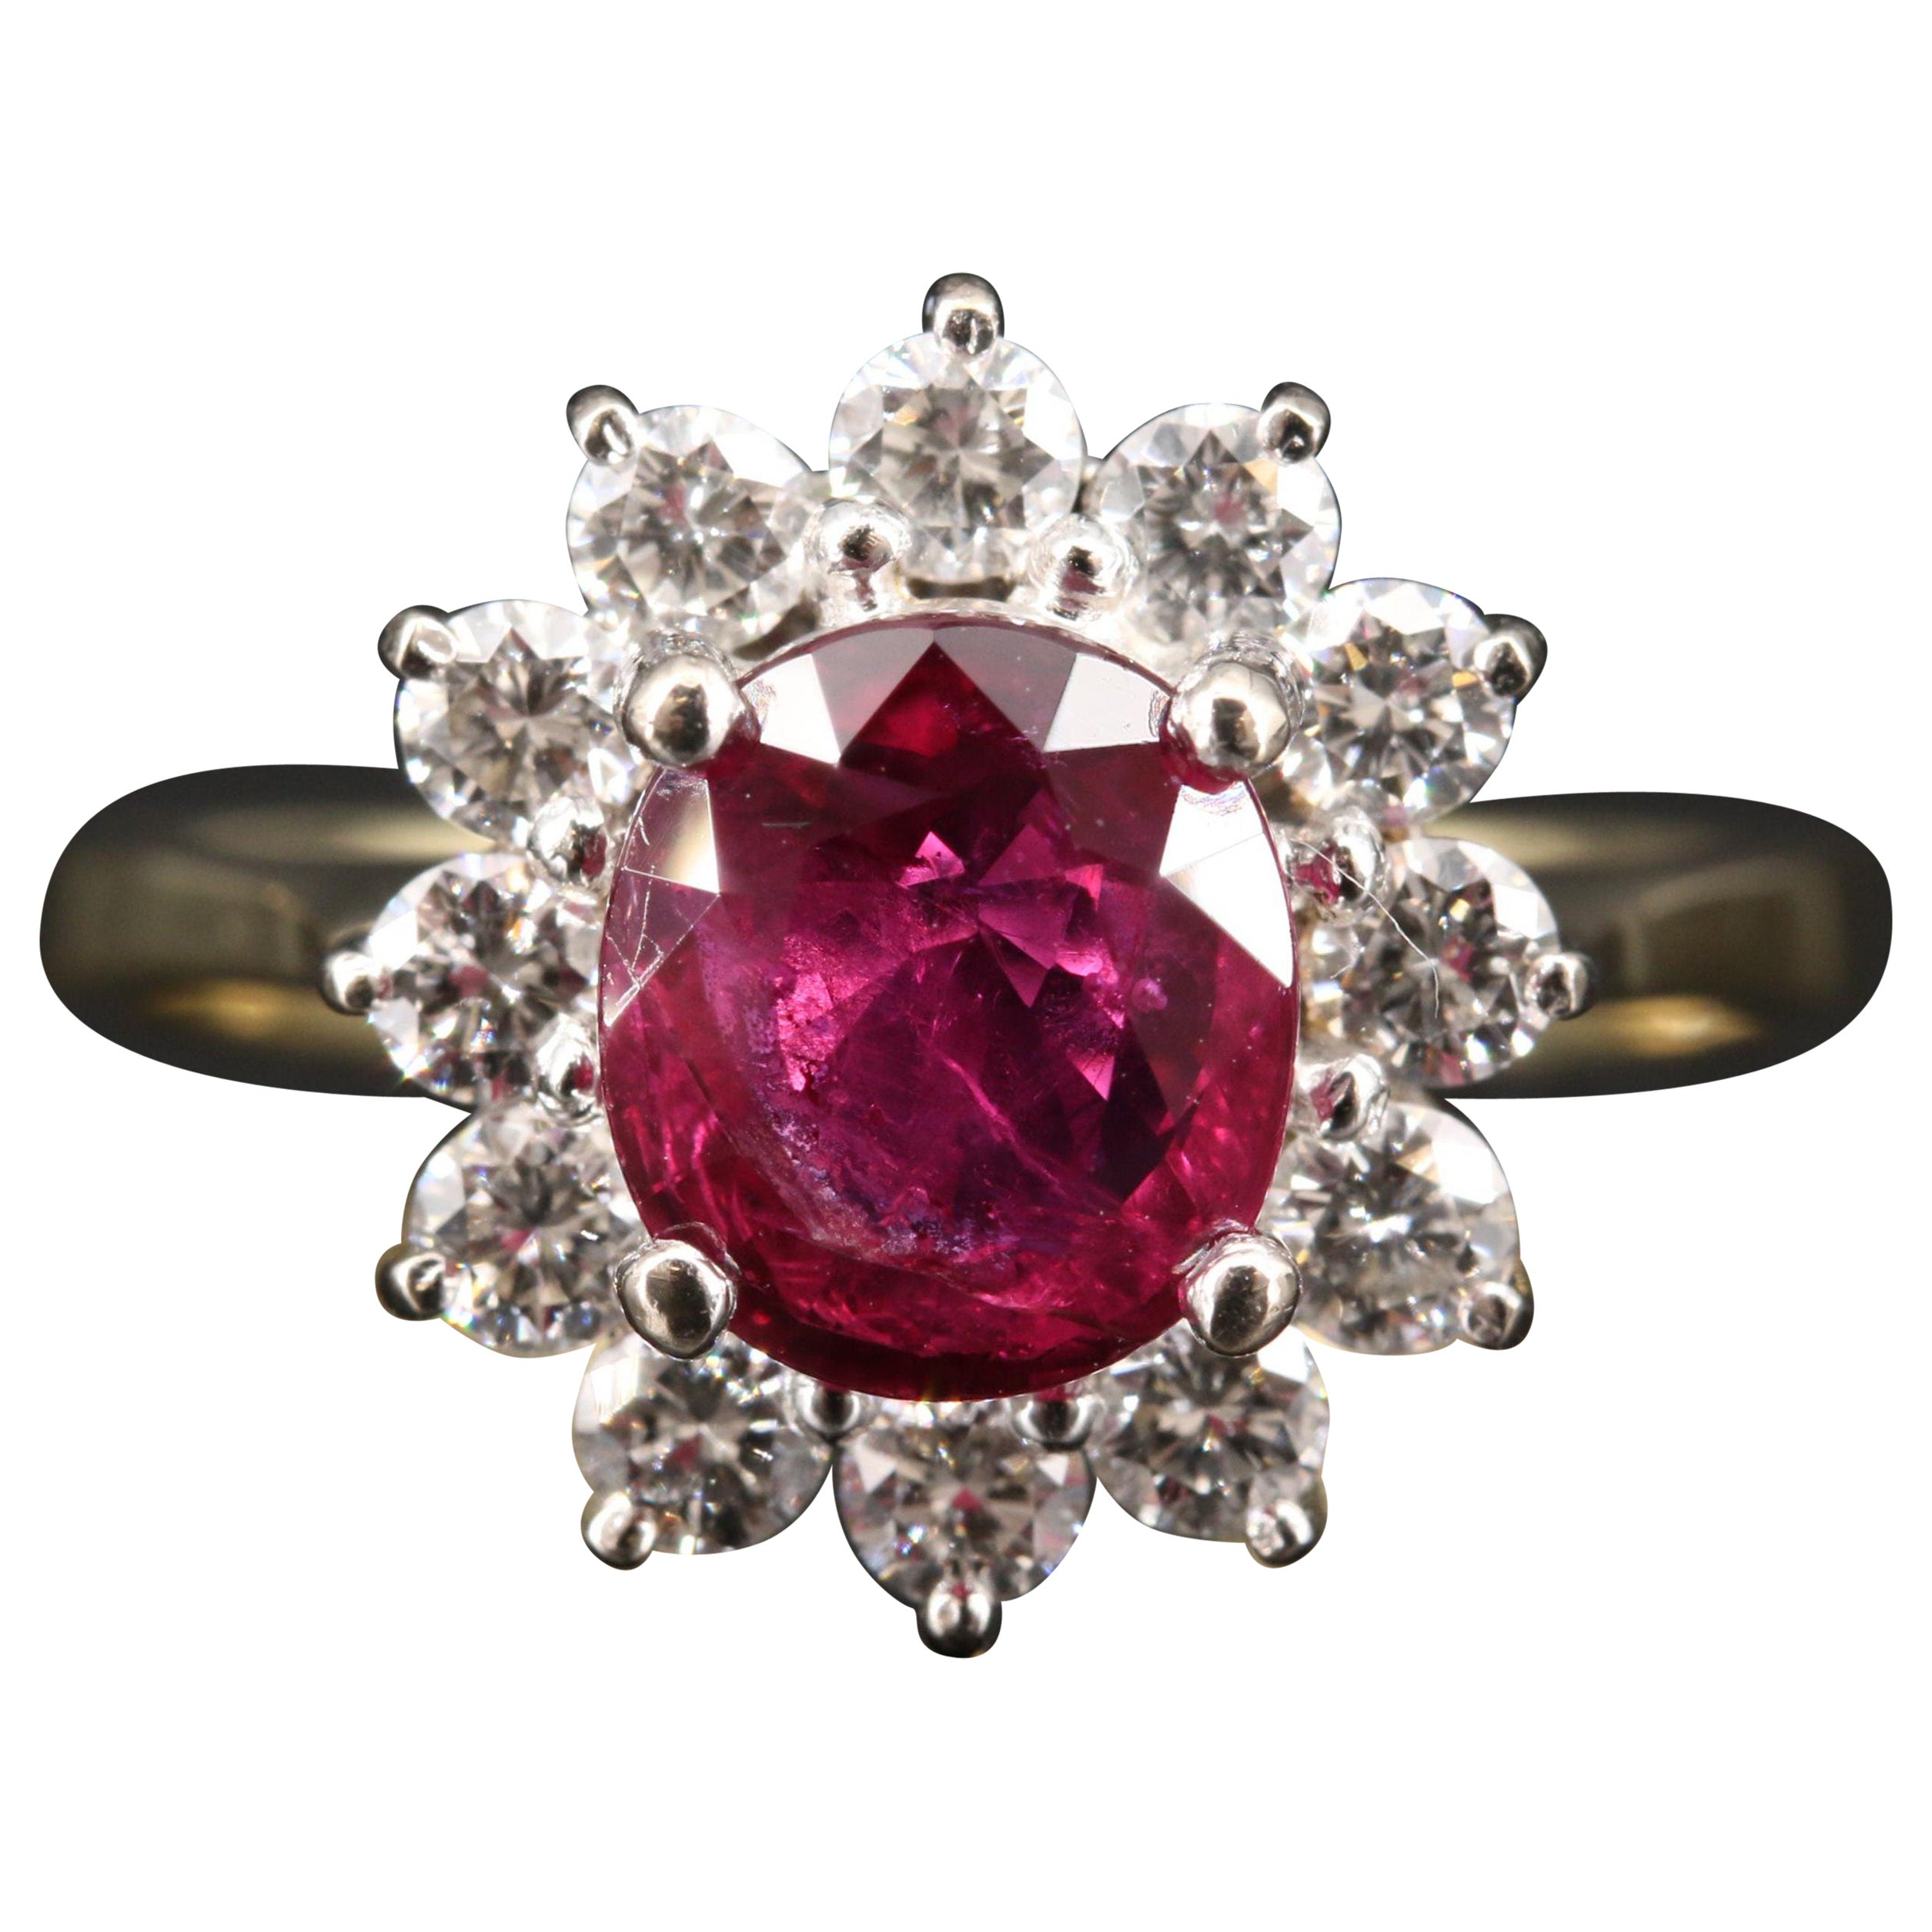 For Sale:  Certified 1.19 Carat Ruby Diamond Engagement Ring Floral Halo Ruby Bridal Ring